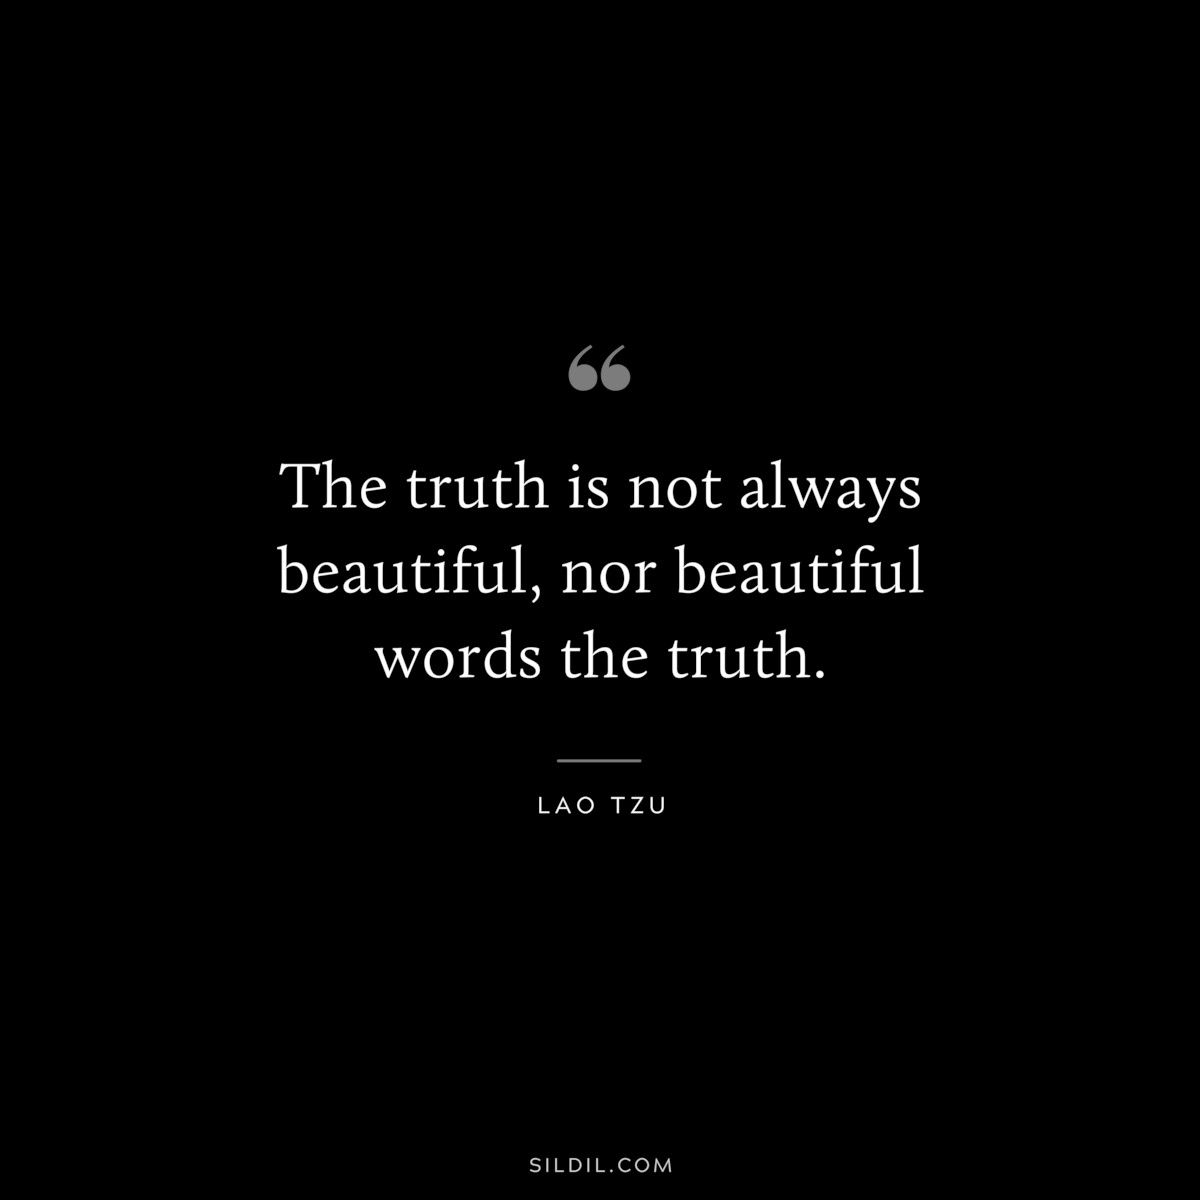 The truth is not always beautiful, nor beautiful words the truth. ― Lao Tzu